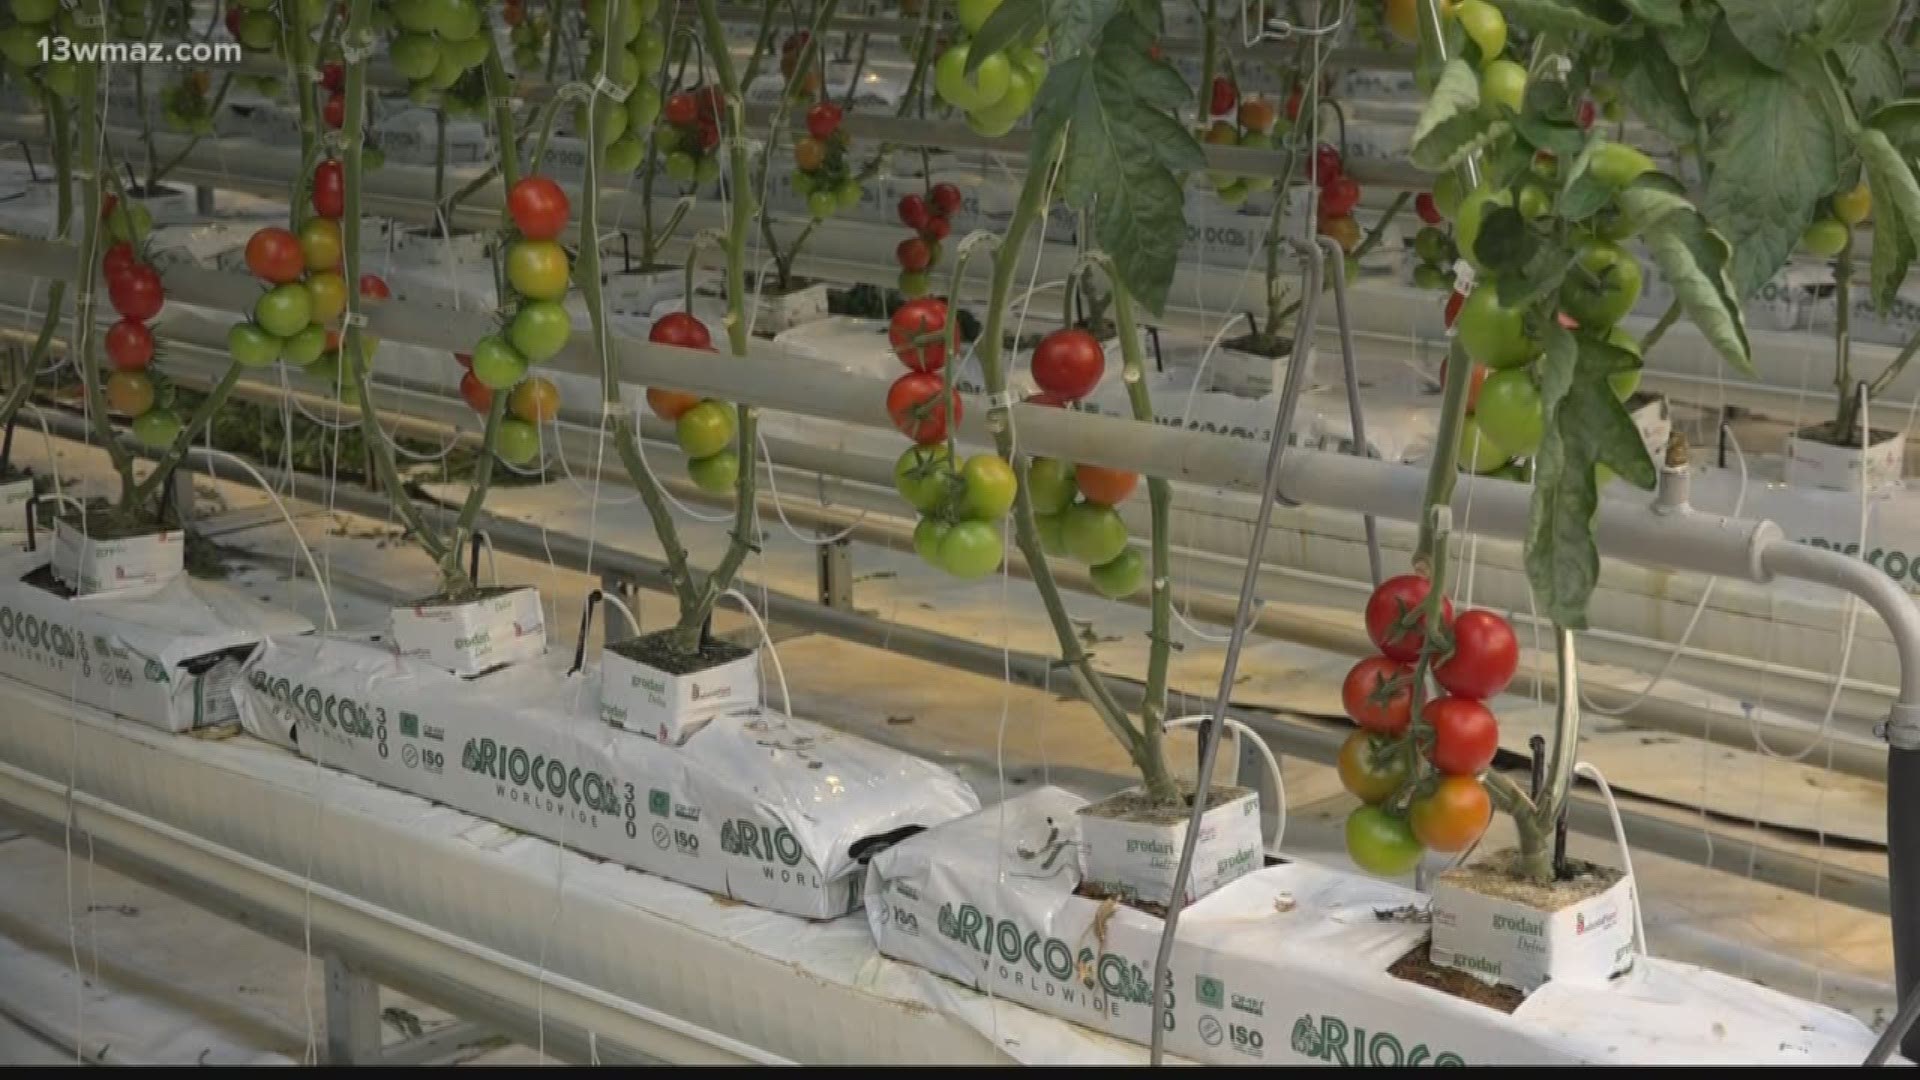 More Peach County Students will get their dose of fresh veggies, thanks to a new partnership with Pure Flavor. Here's how they're helping children eat healthier.